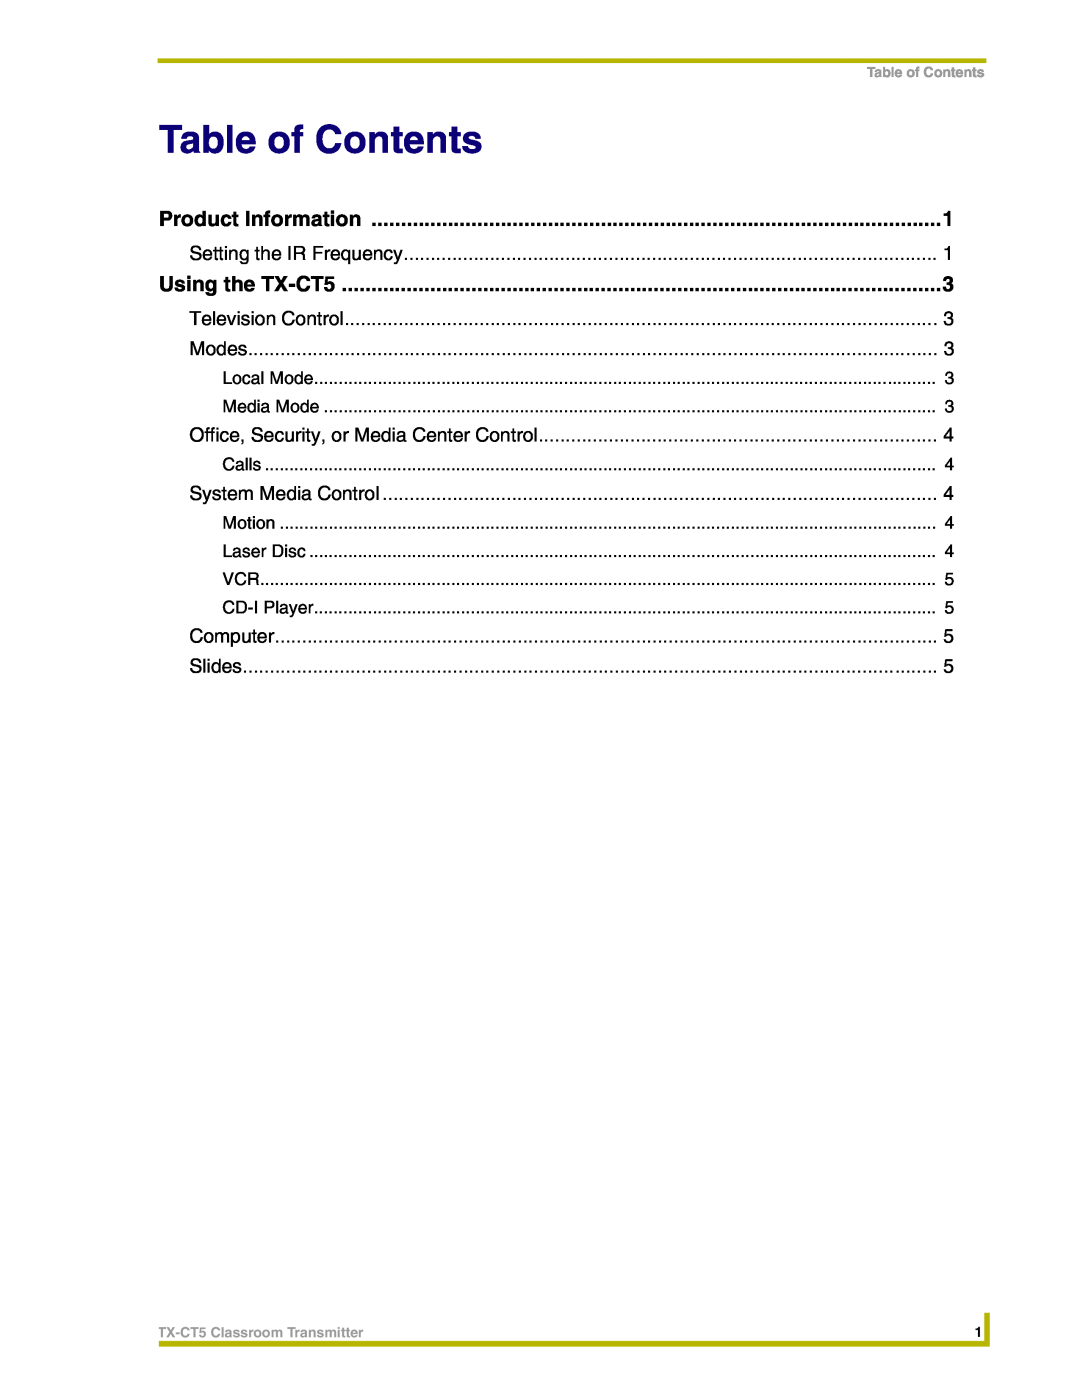 AMX instruction manual Table of Contents, Product Information, Using the TX-CT5 